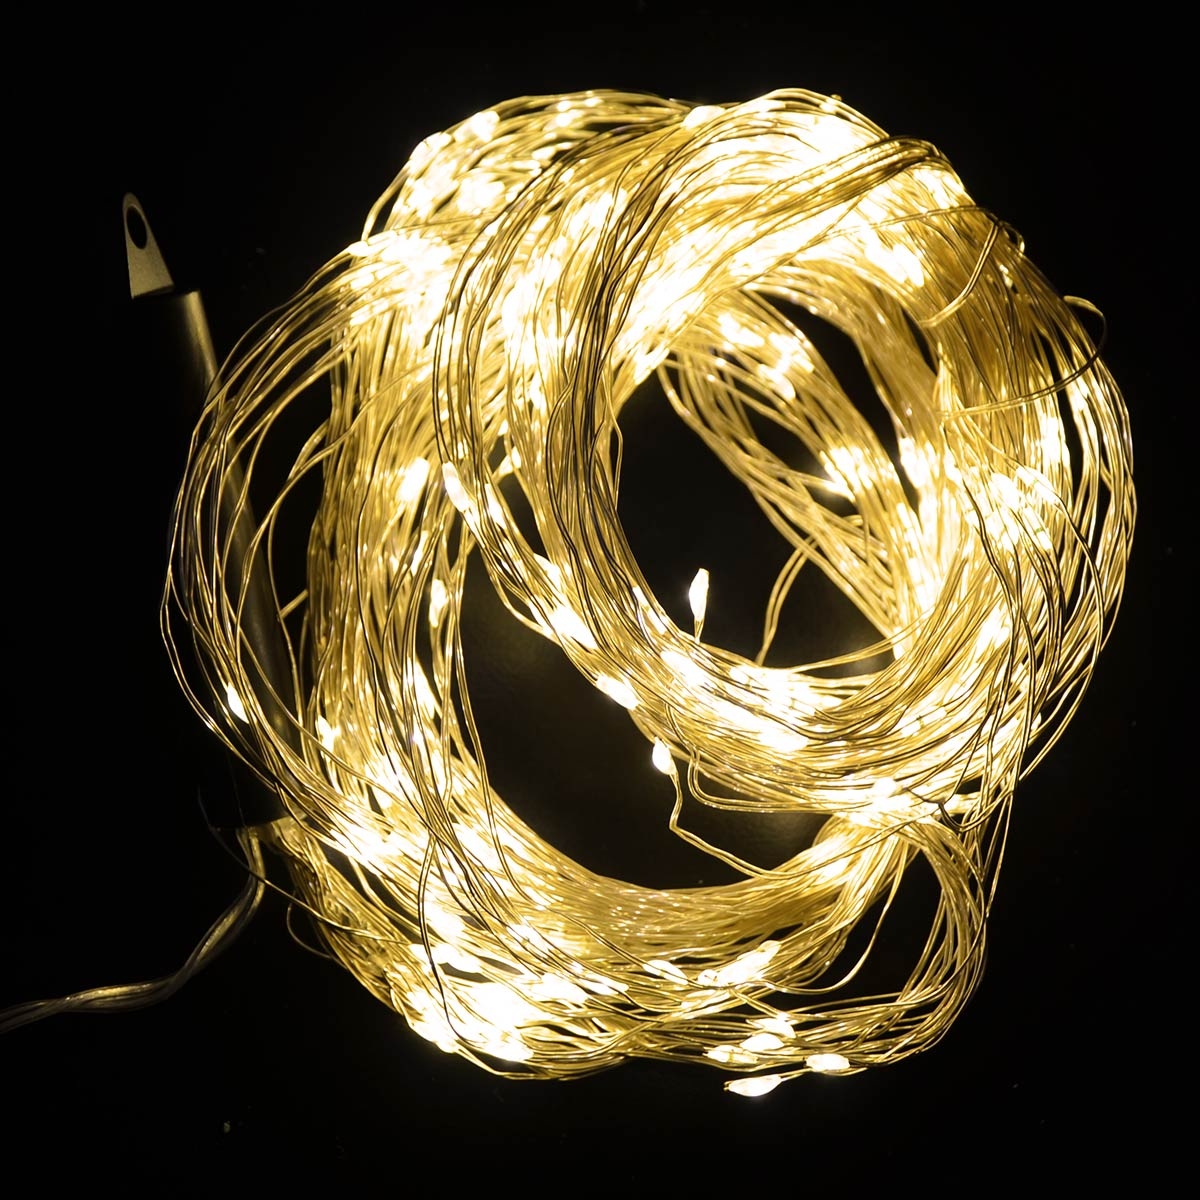 Decorative Curtain Light Warm White Steady On 400LED (3M) for Christmas, Wedding and Parties